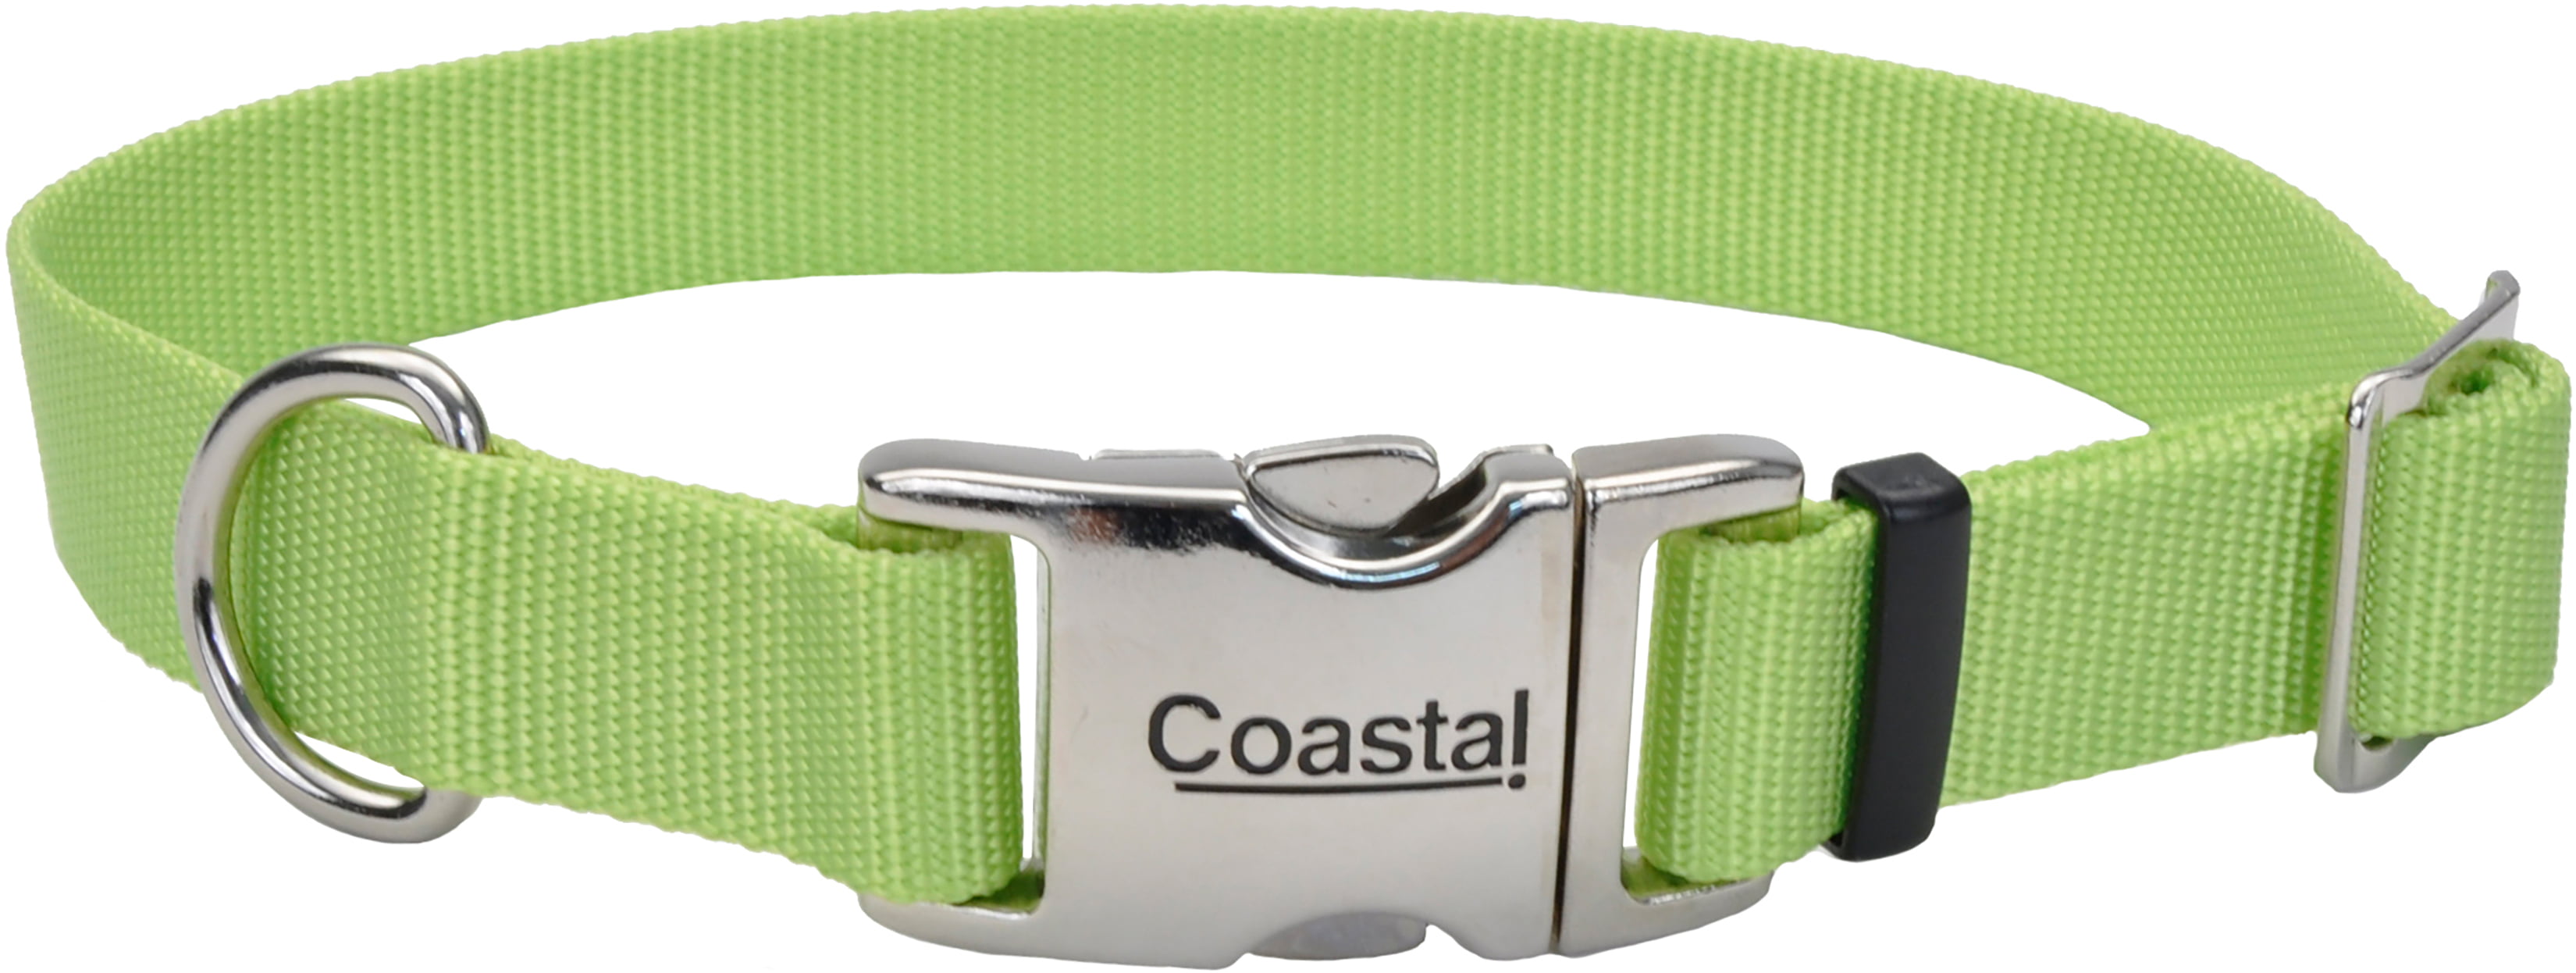 Buckle-Down Dog Collar Plastic Clip Bass Fish Water Bubbles Available in Adjustable Sizes for Small Medium Large Dogs